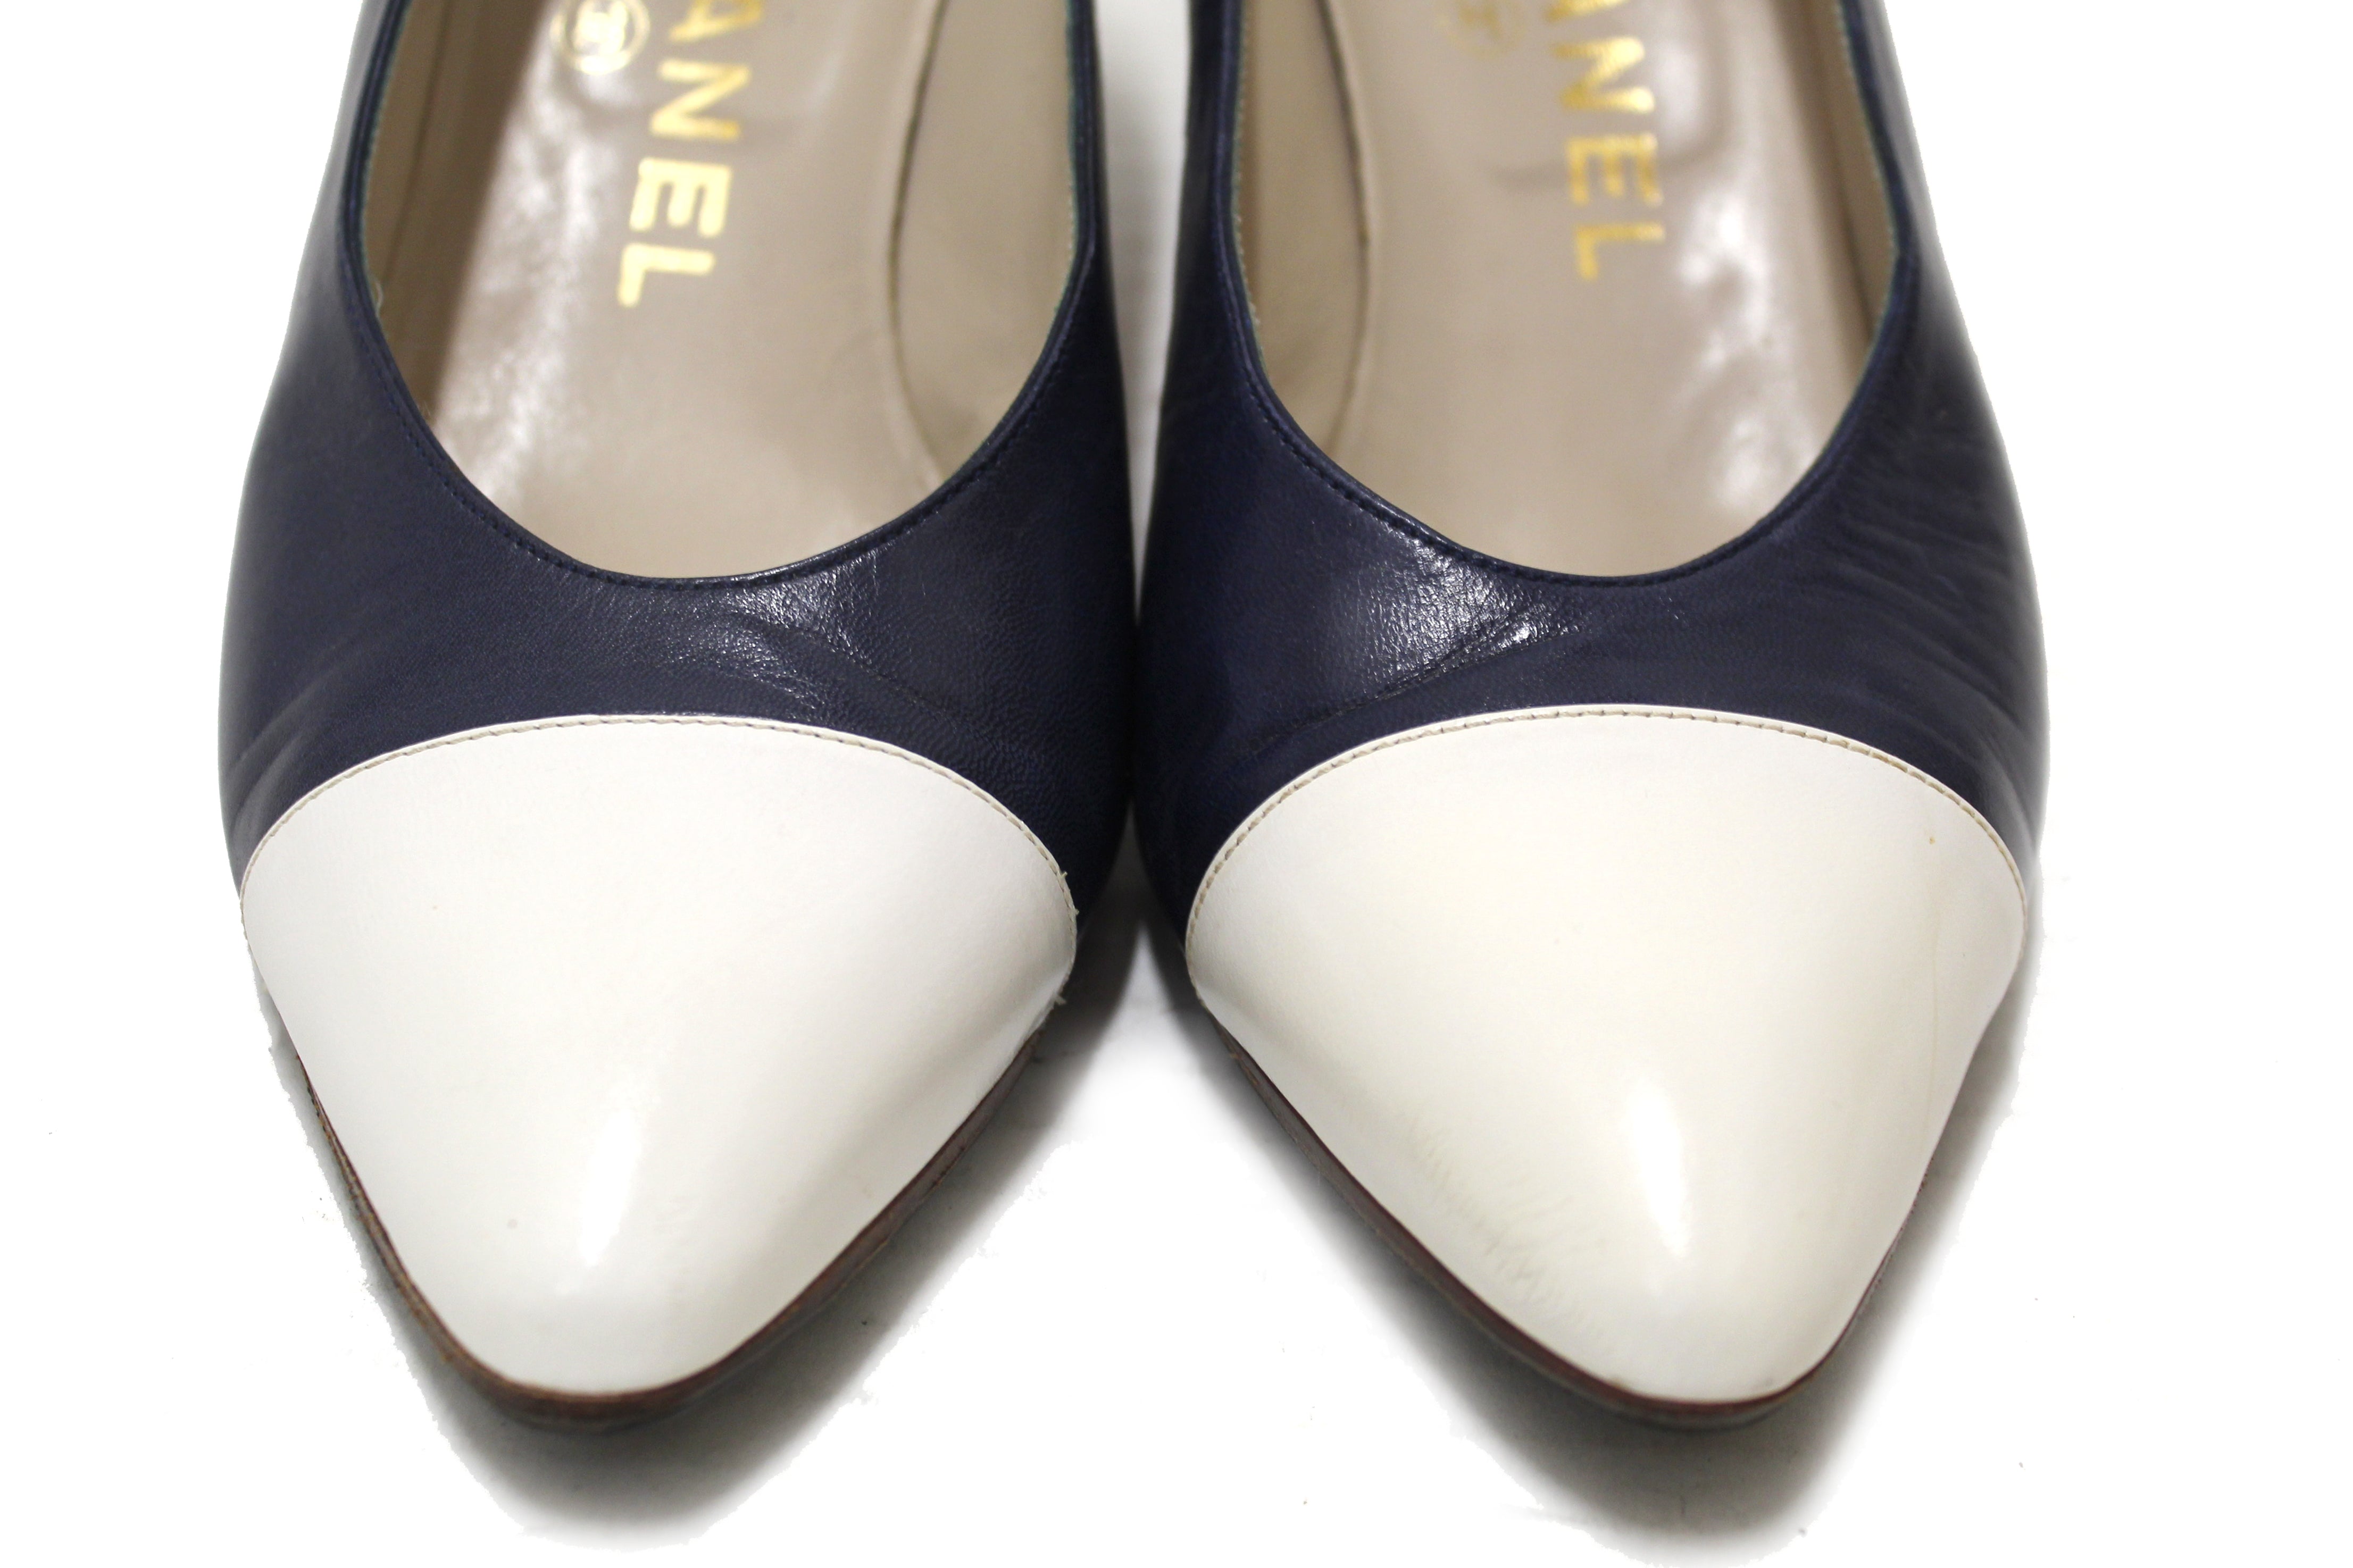 Authentic Chanel Navy and White Leather Pointed Heel size 35.5